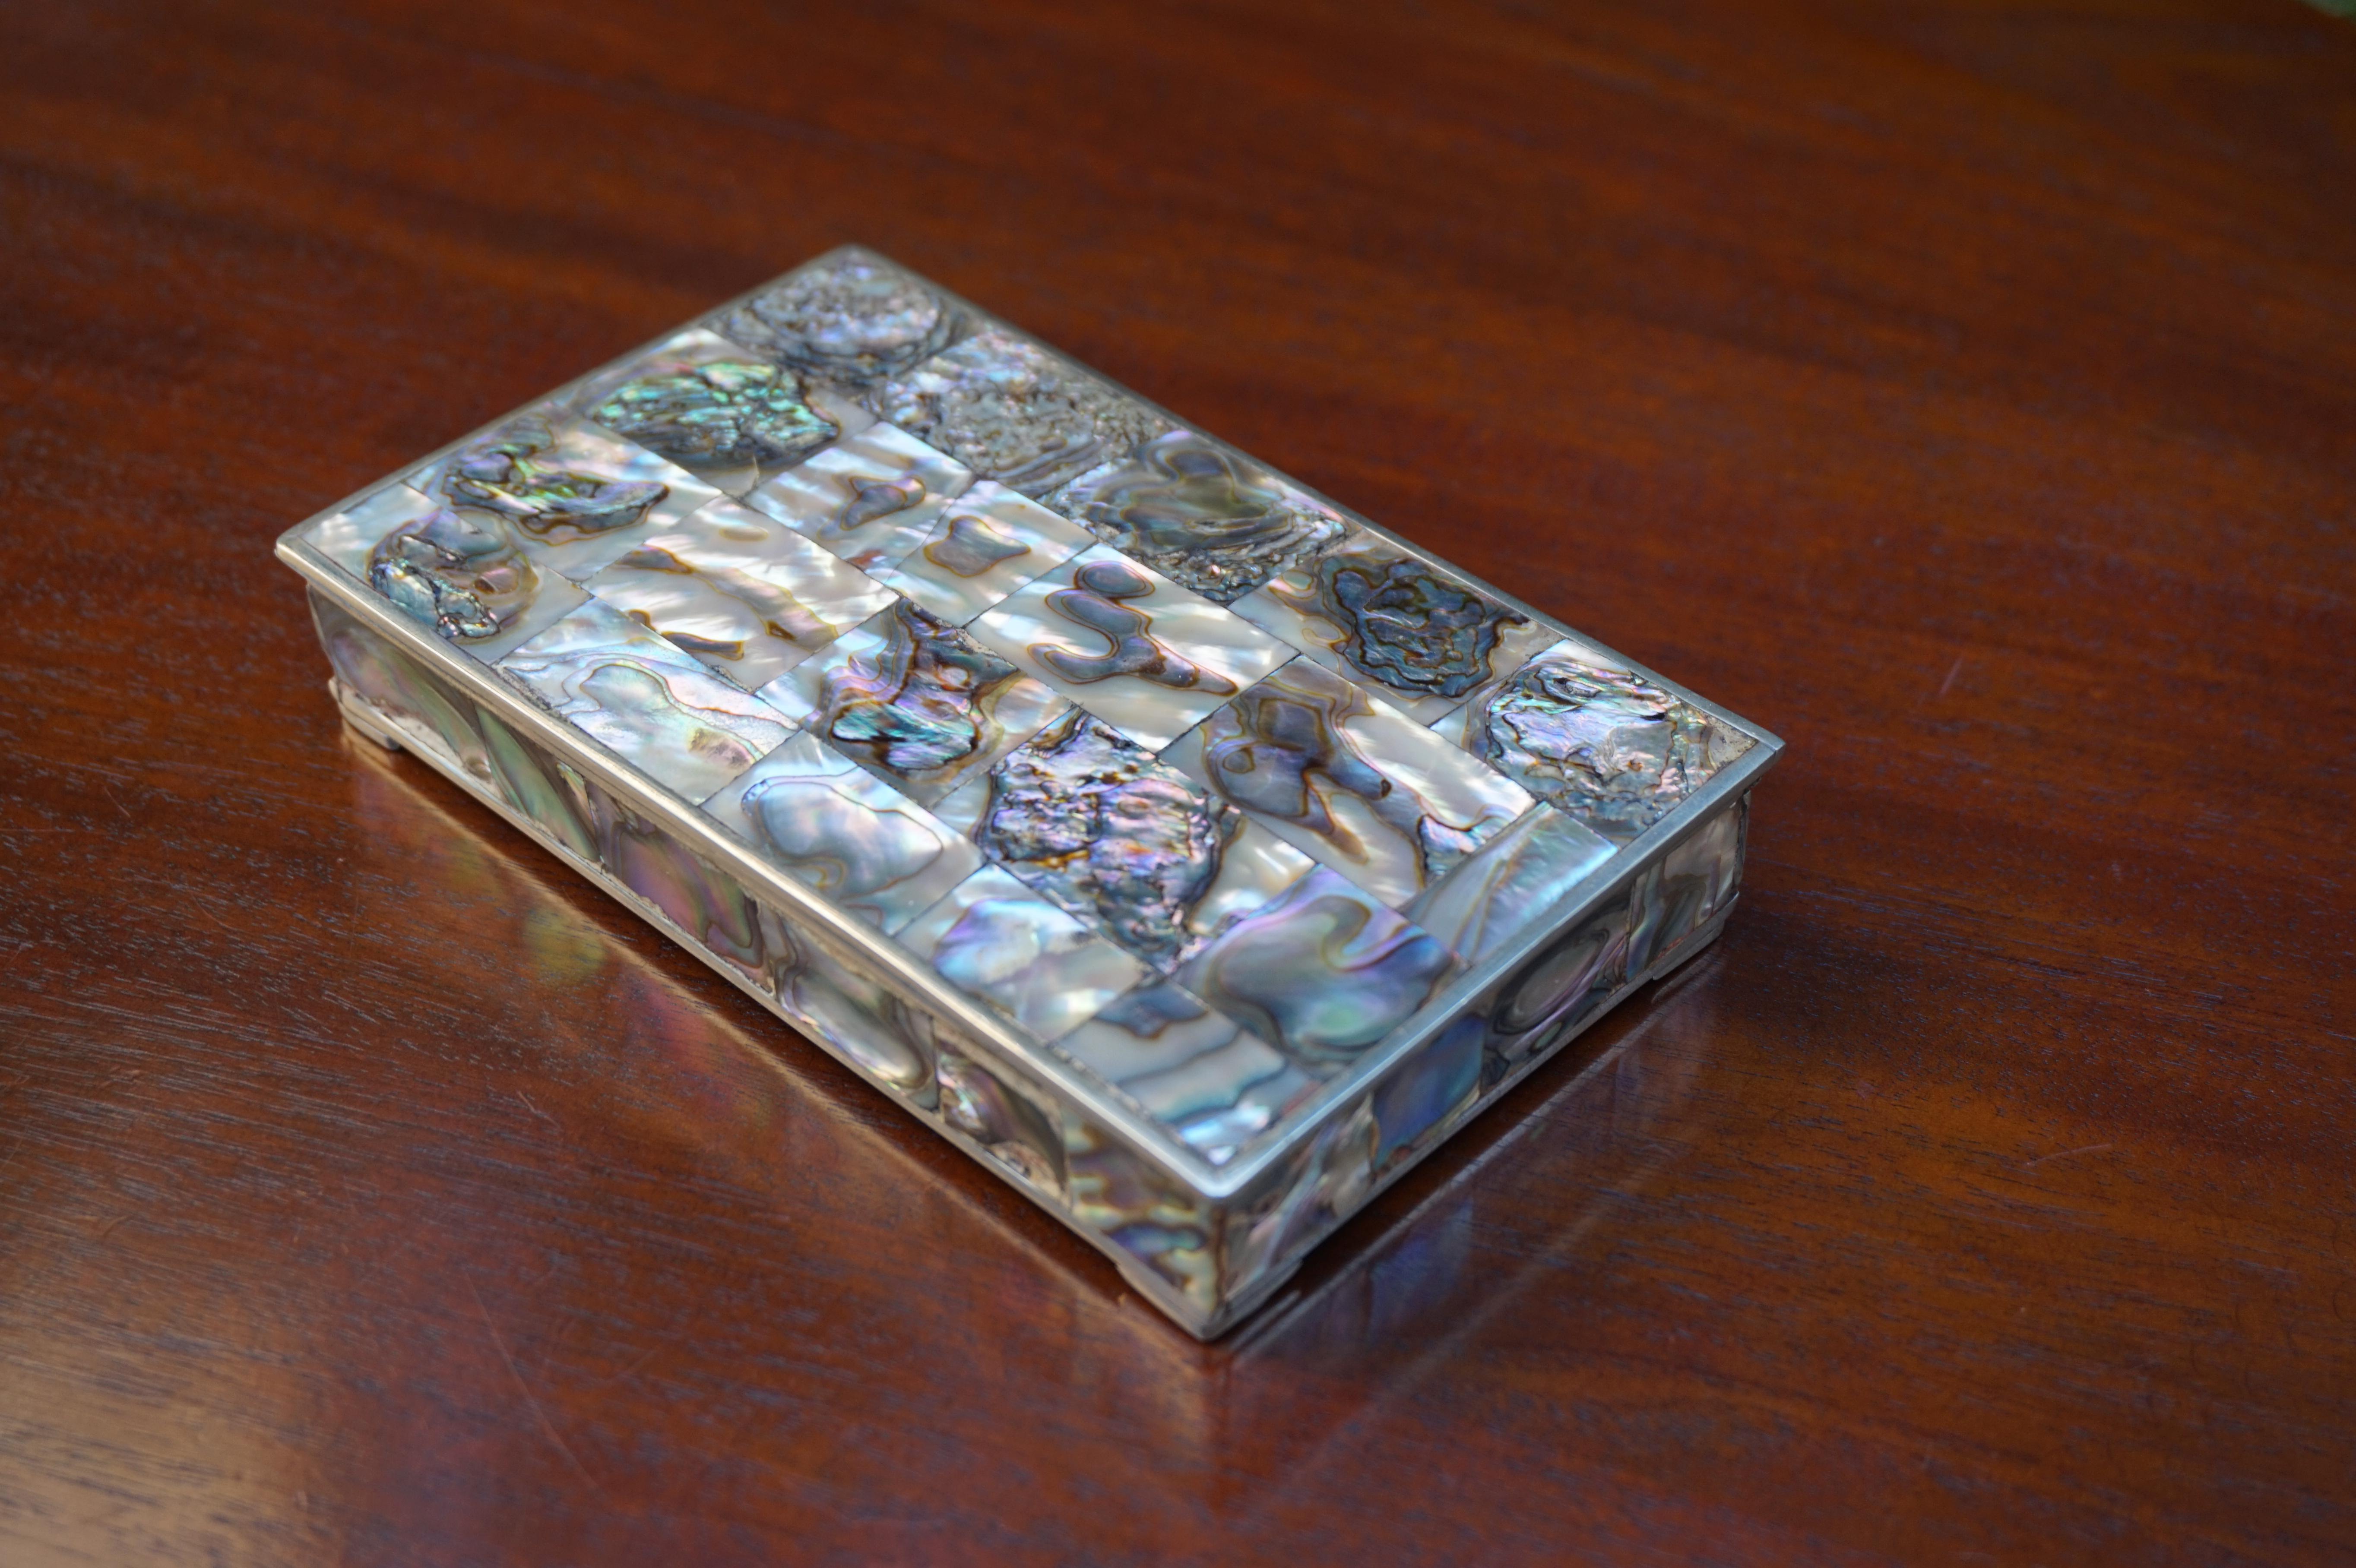 All handcrafted and highly stylish box from the 1950s.

If you are looking for a truly beautiful box for yourself or maybe as a gift for that special someone in your life then this rare and all handcrafted gem could be perfect. We love everything